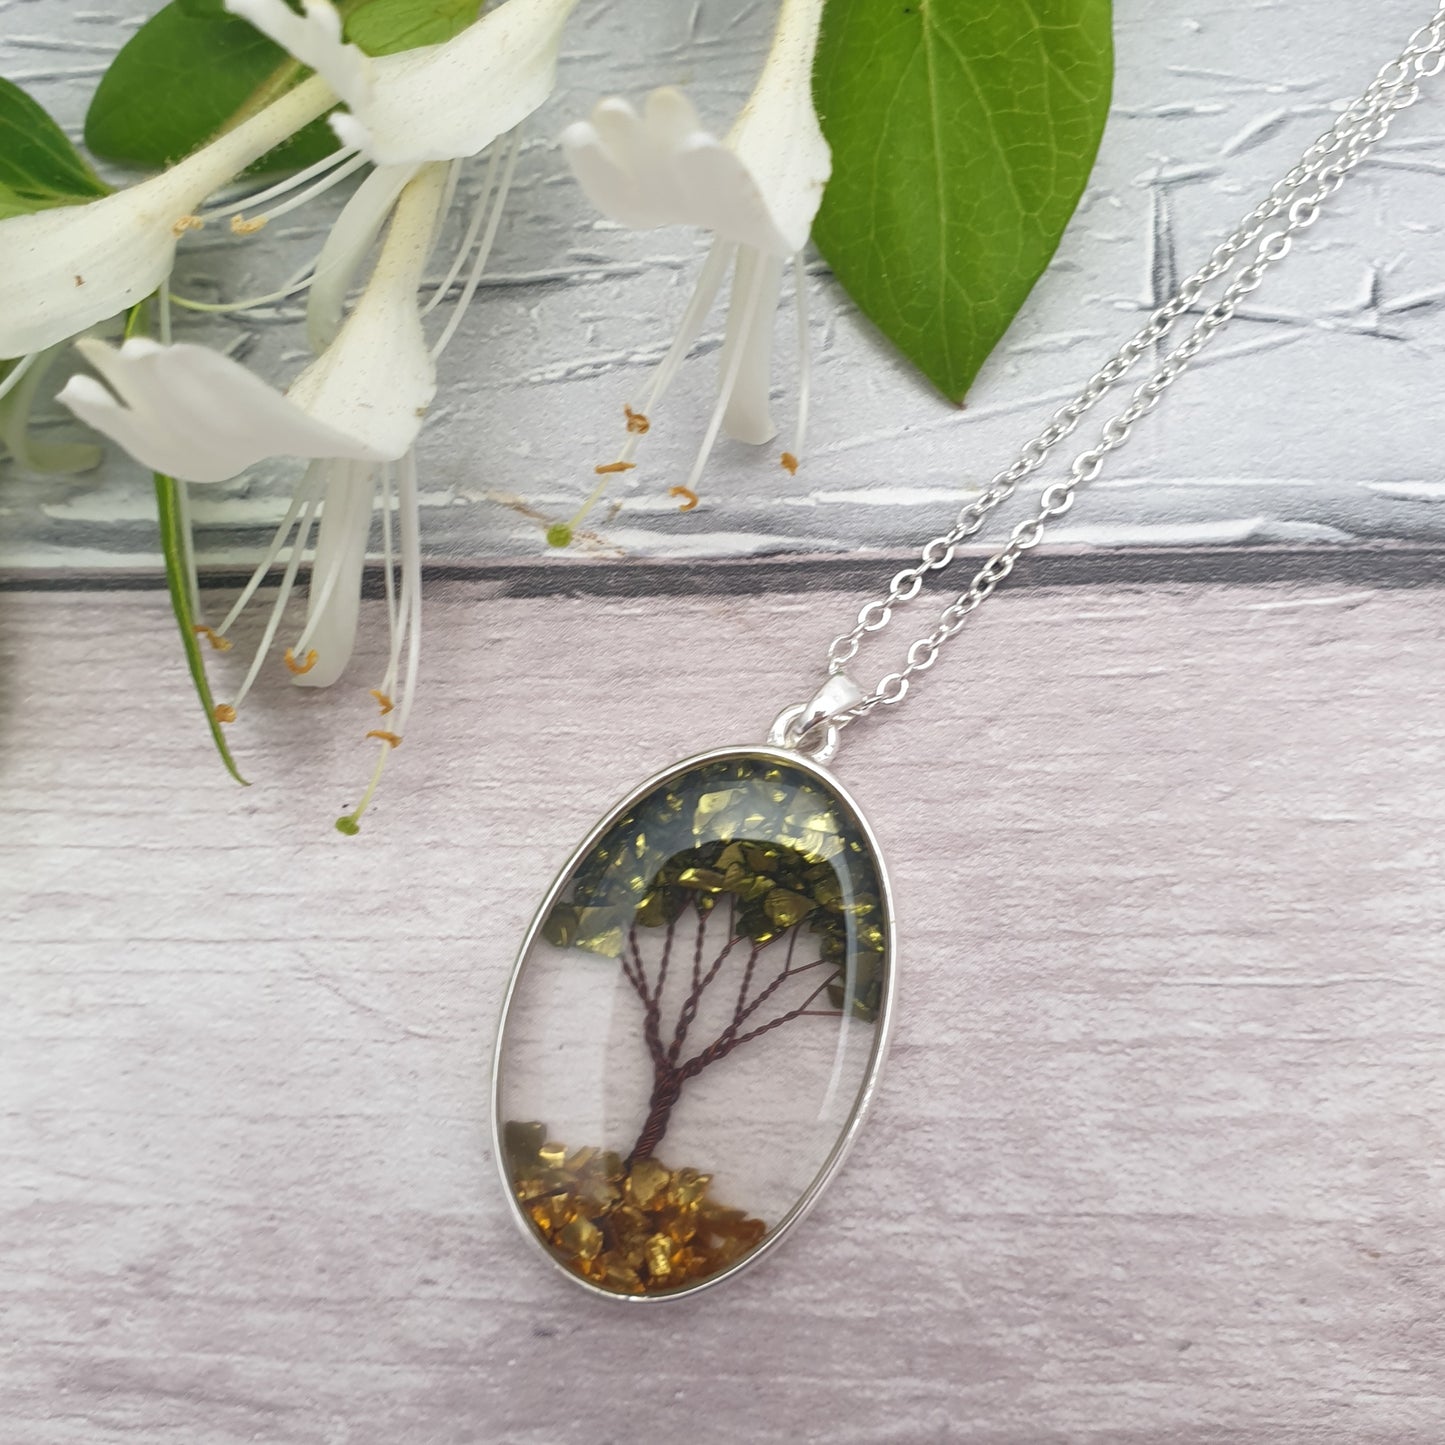 Tree of Life made from Semi-Precious Stones encased in an glass oval pendant